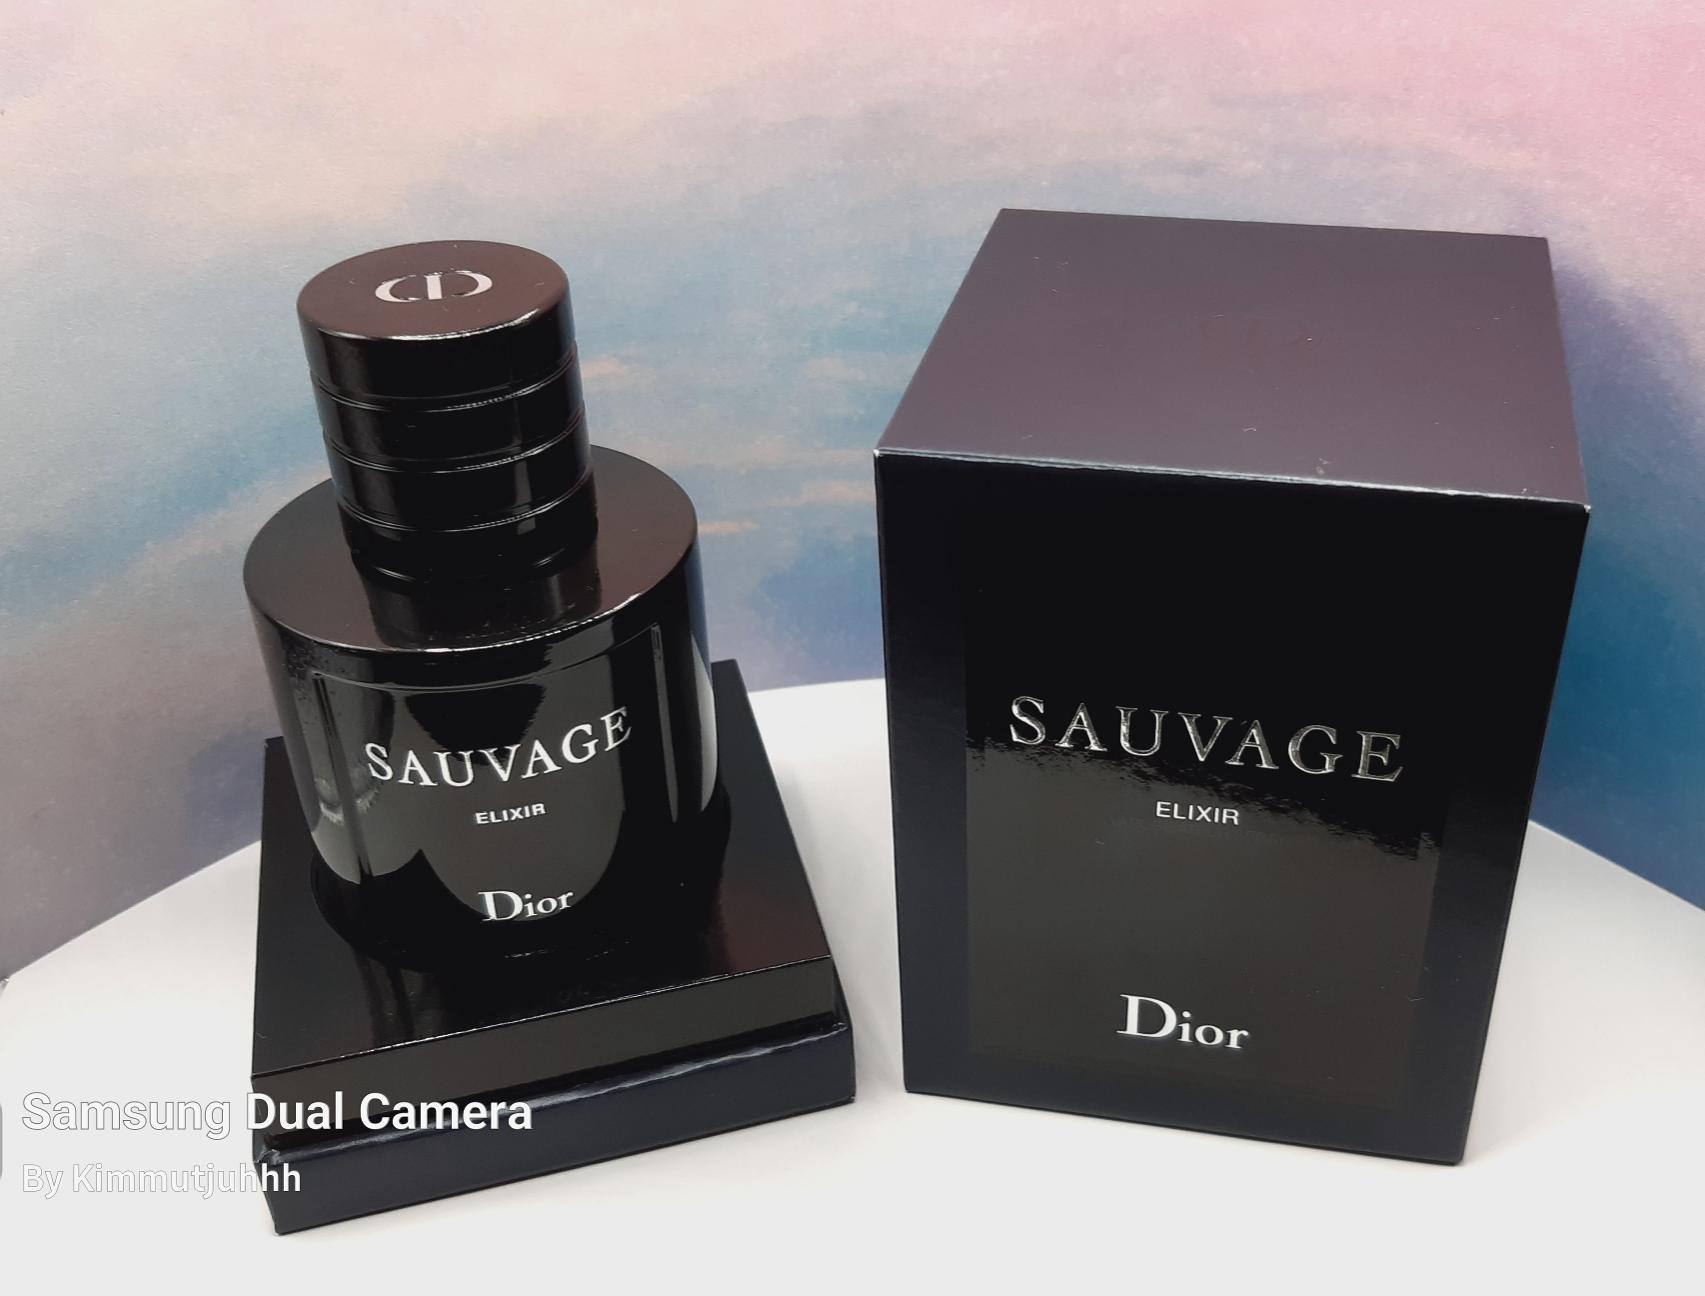 Dior Sauvage Review: Is It Worth It?